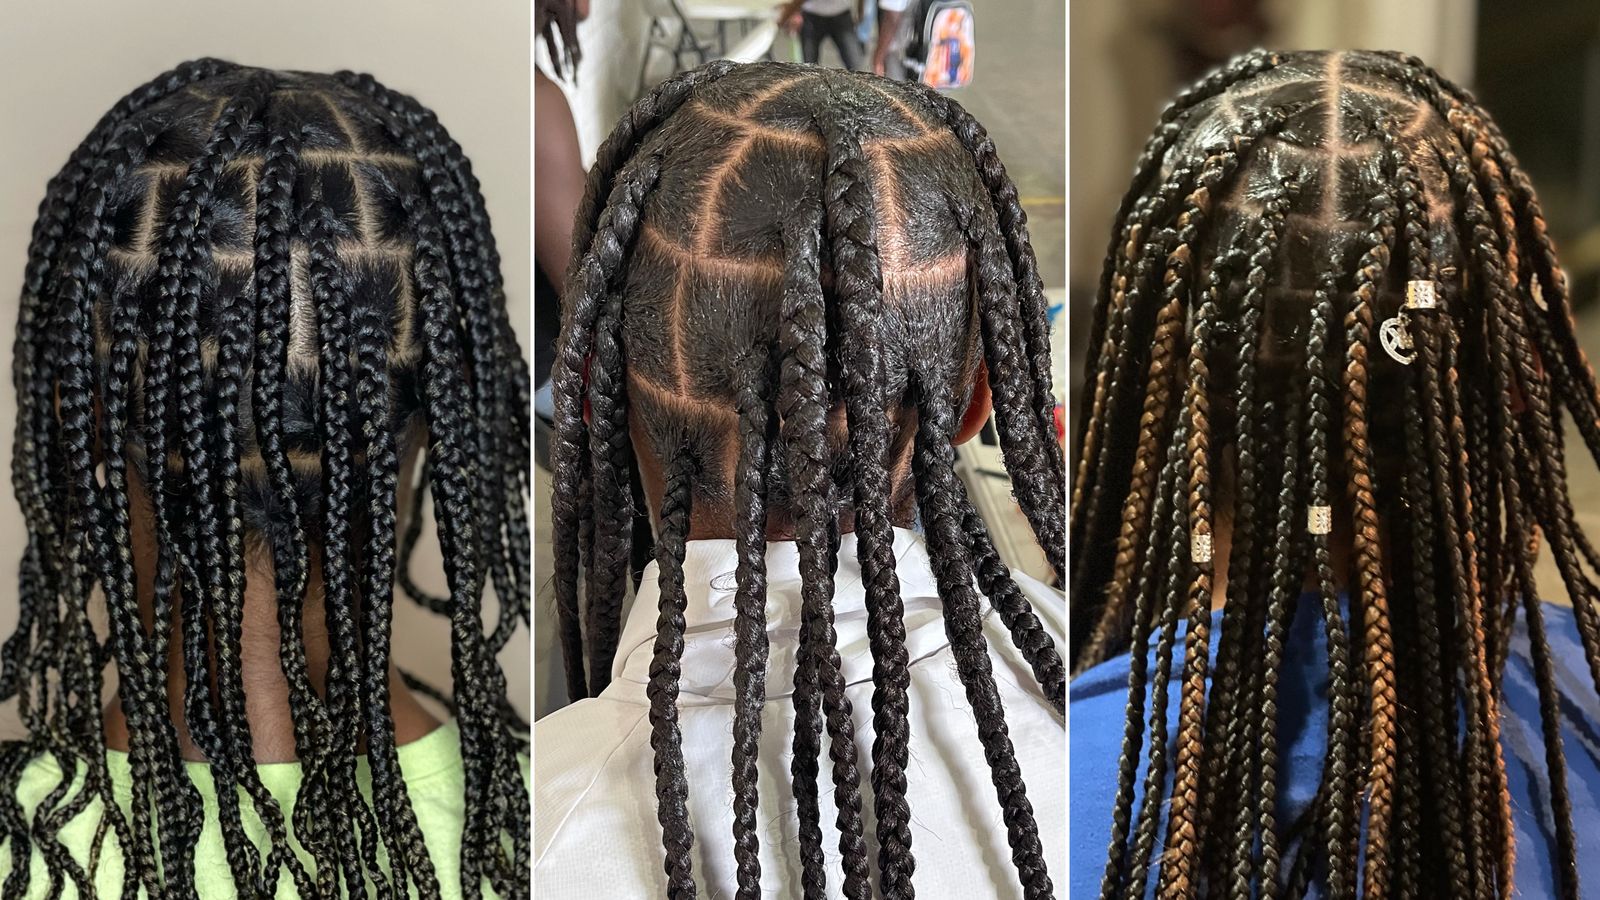 This single mom is braiding kids' hair for free to help other struggling  parents | CNN